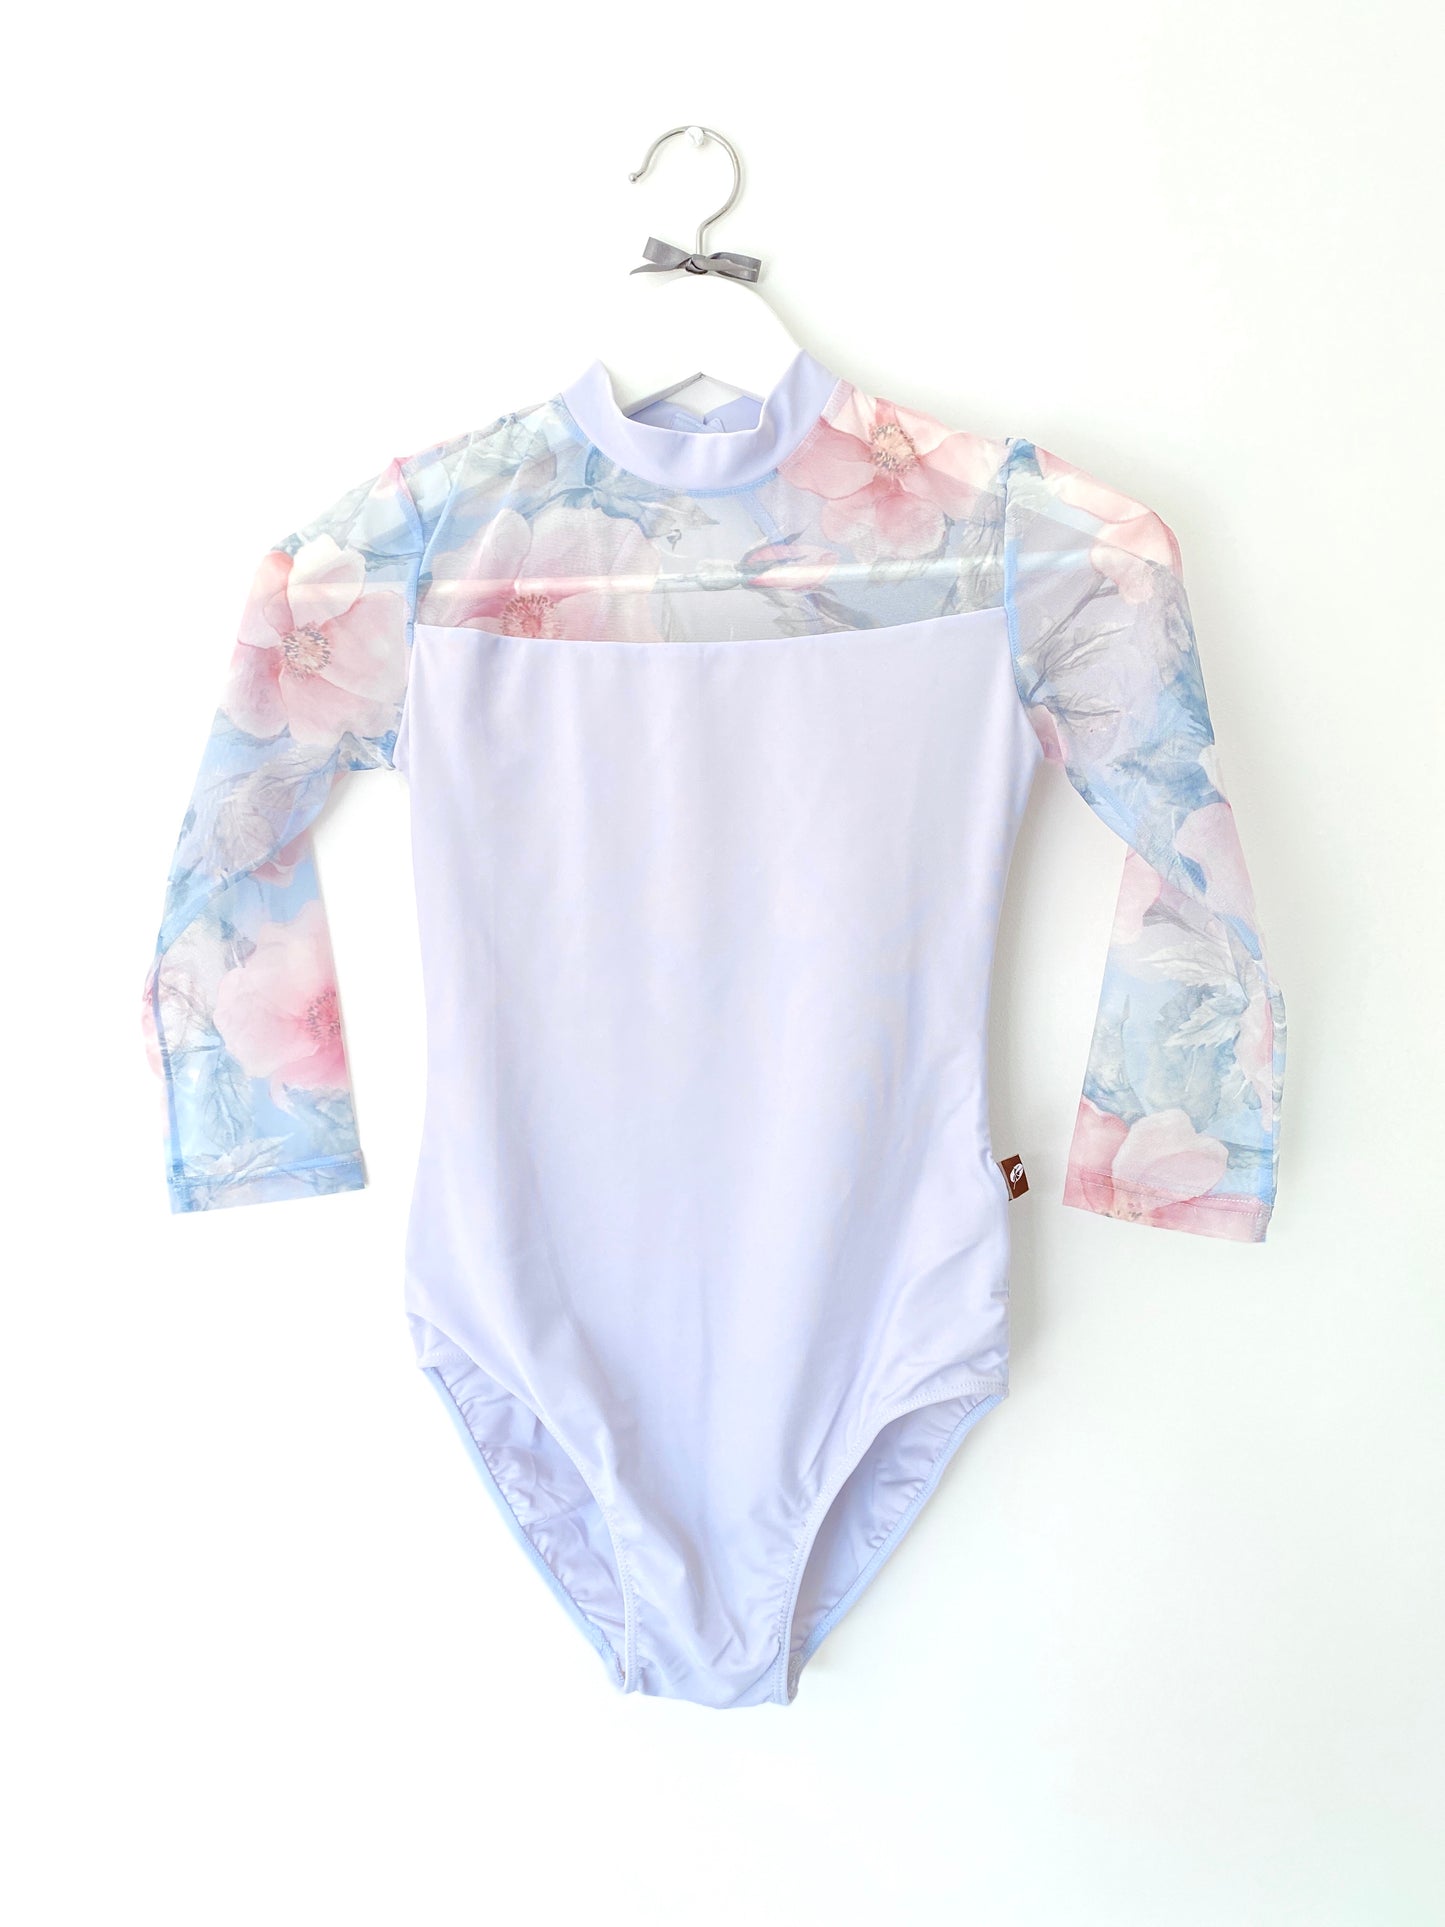 Pale blue leotard with rose printed mesh  long sleeves and back. from The Collective Dancewear